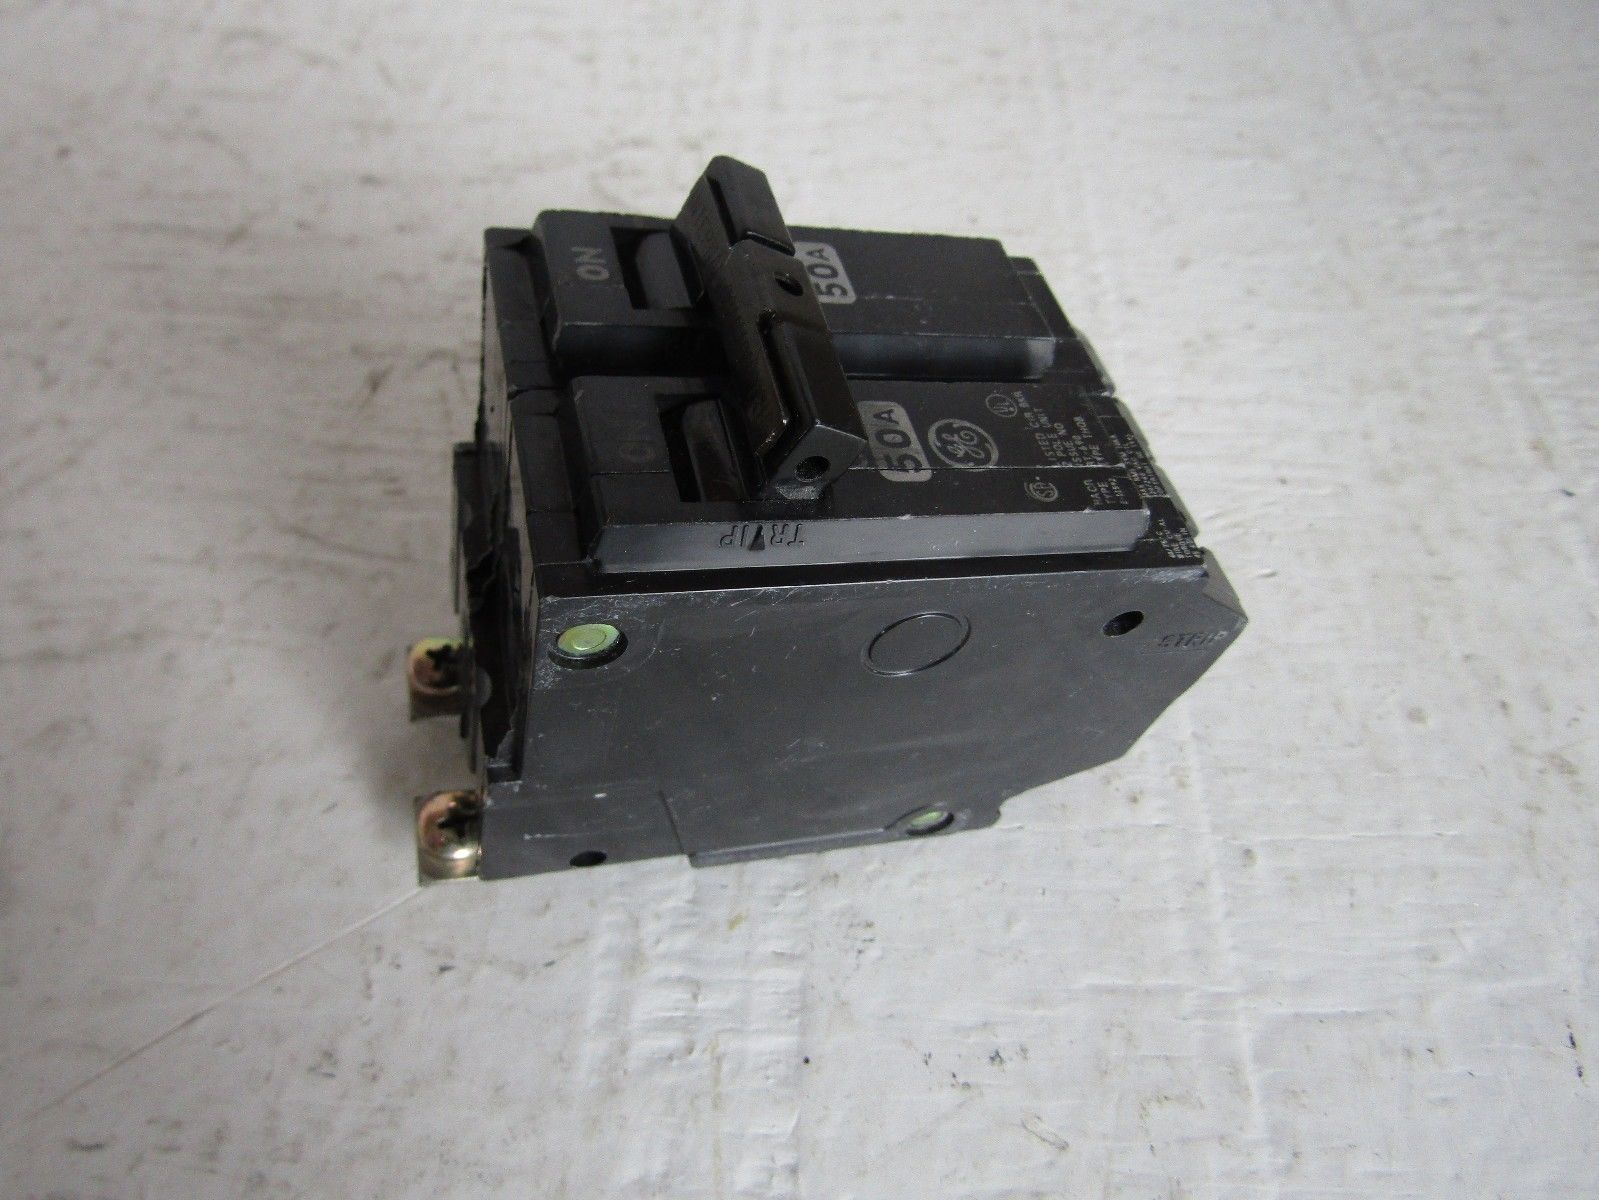 GE GENERAL ELECTRIC THQB22050 2 POLE 50 AMP 240 VOLT BOLT ON CIRCUIT BREAKER Powered Electric